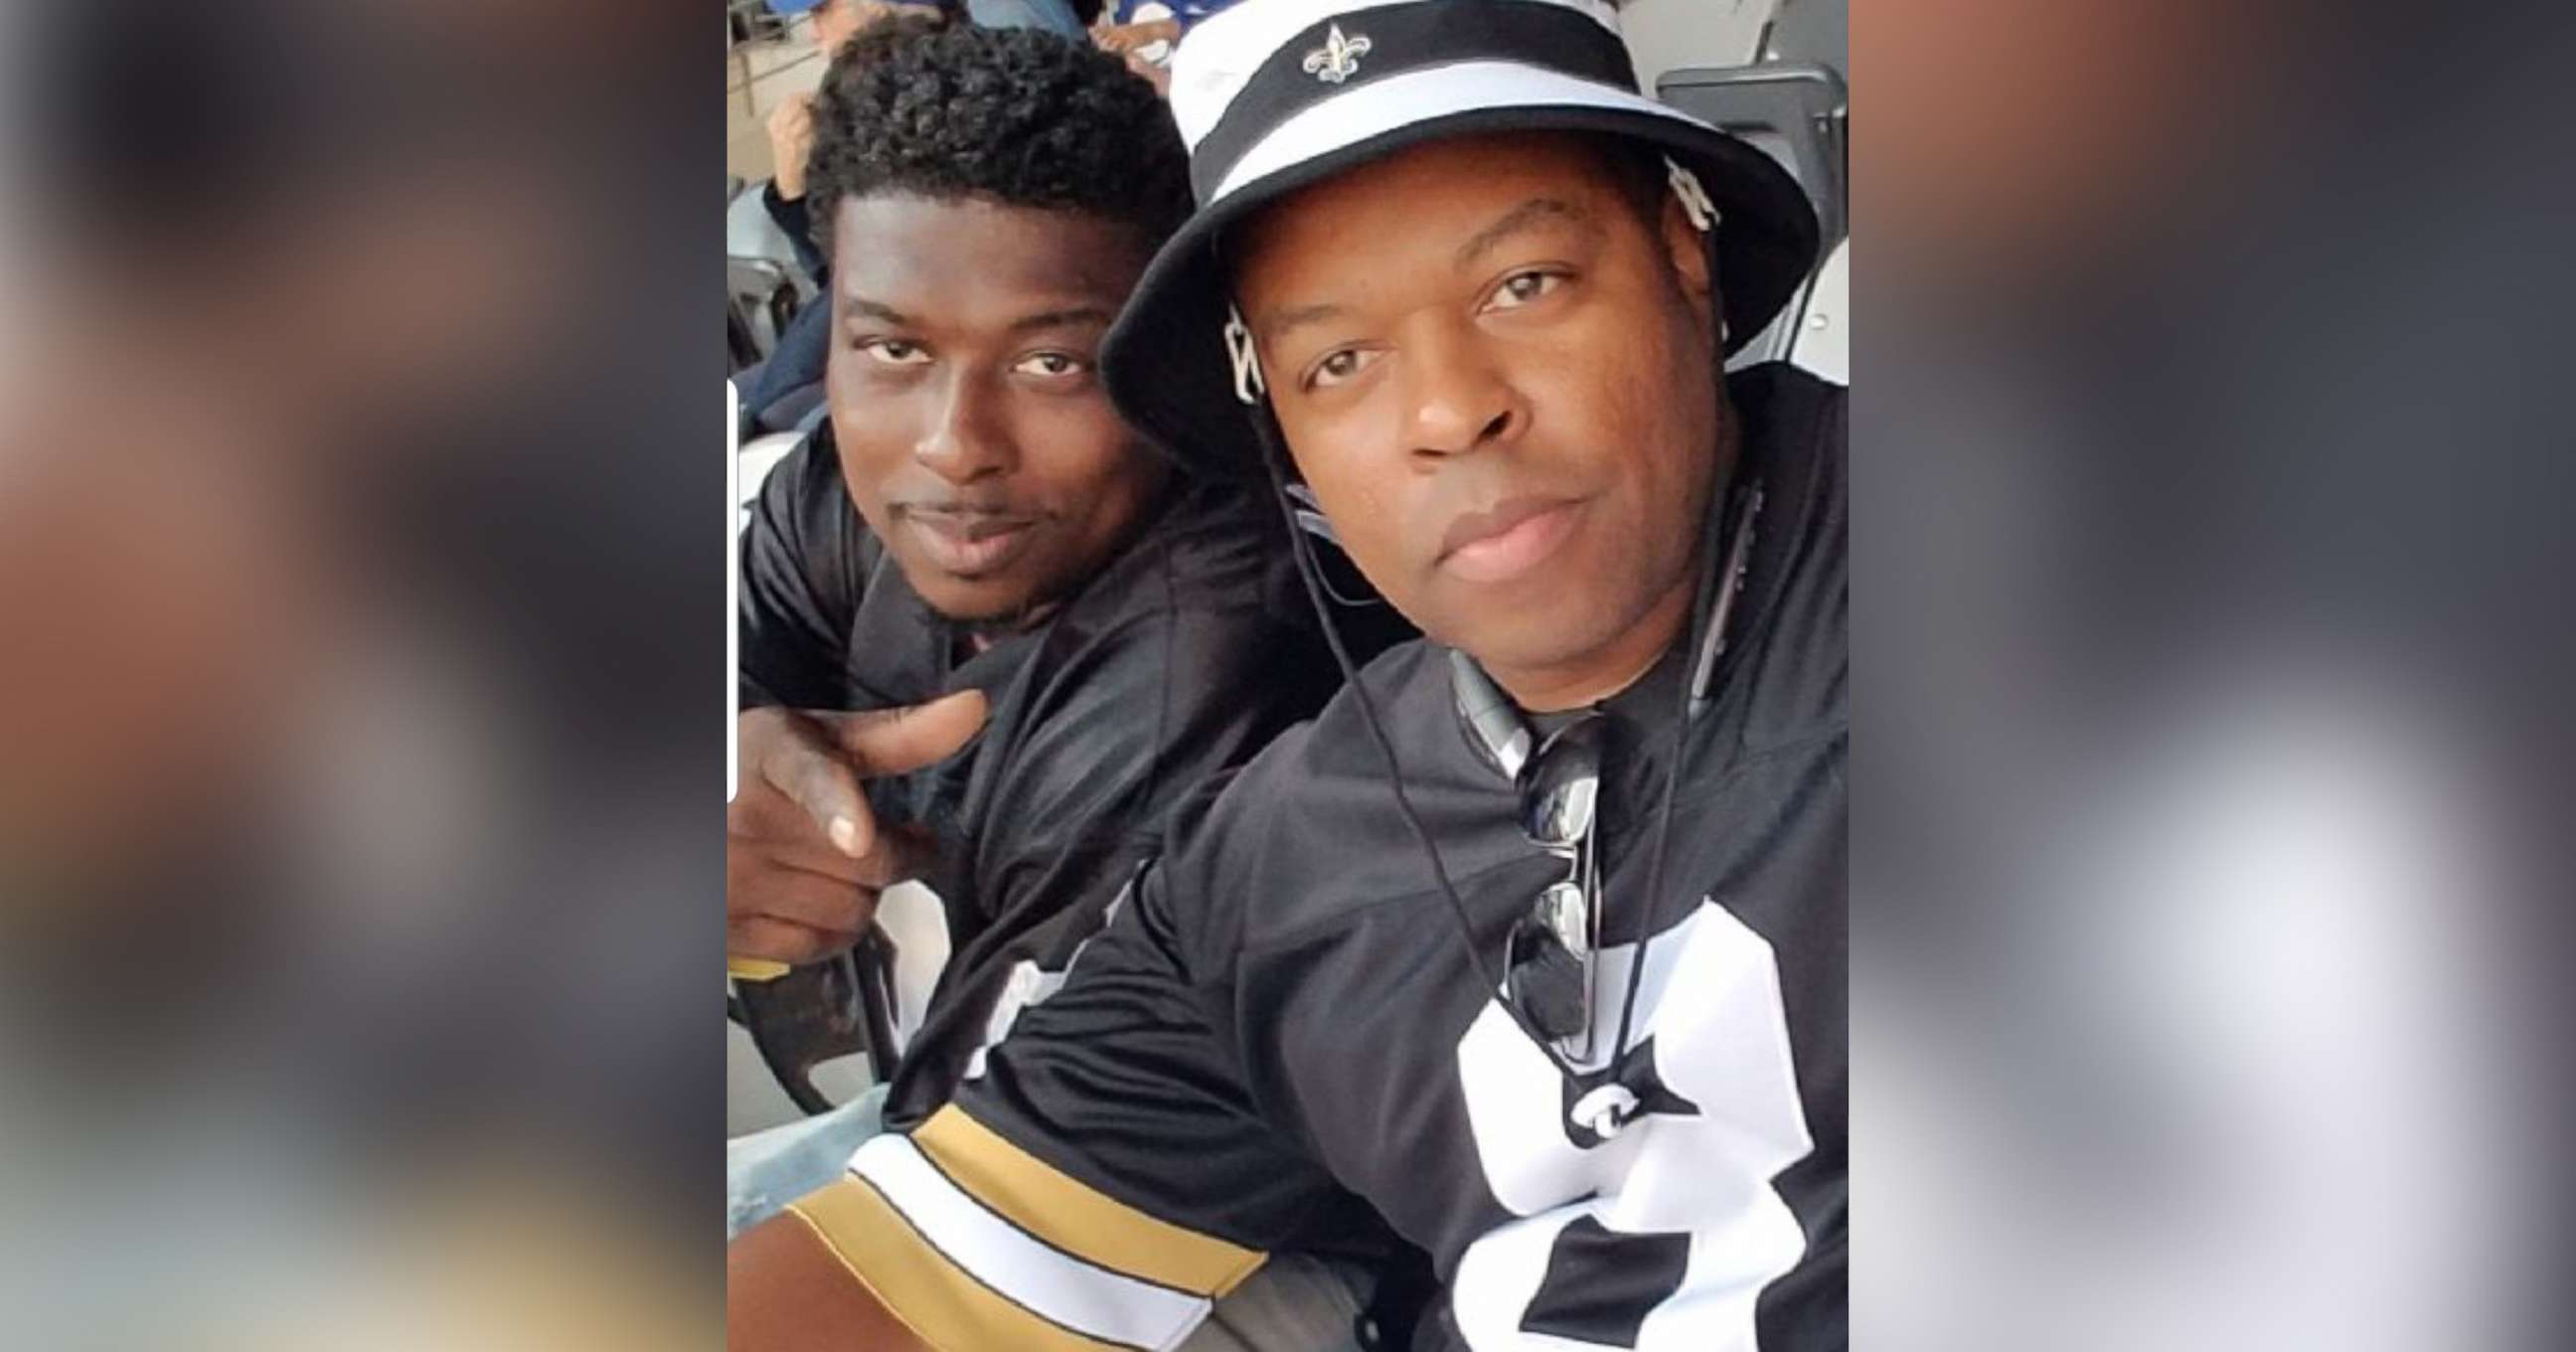 PHOTO: Quinnyon Wimberly and Frank Wimberly were both fans of the New Orleans Saints. The last time Frank saw his brother was at a game in New Orleans.